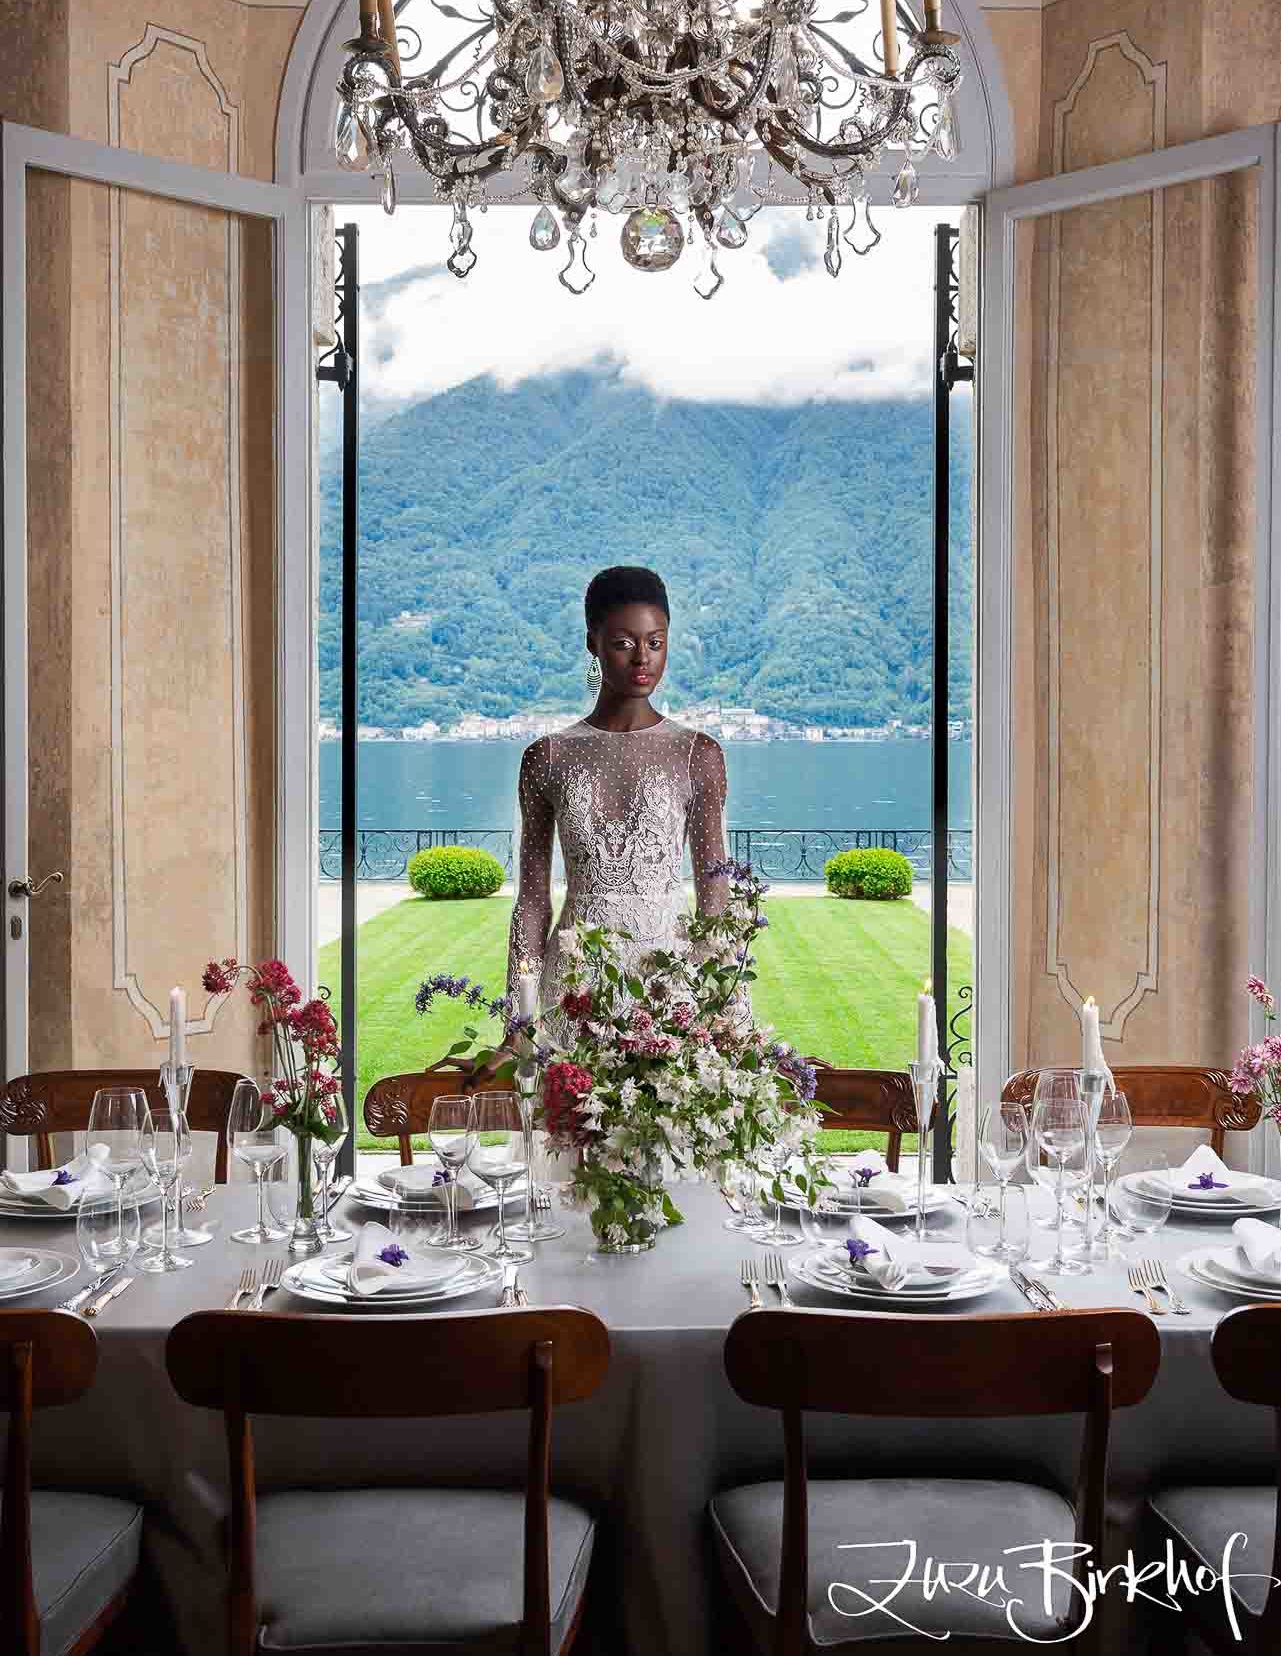 Villa Balbiano luxury property Lake Como Milan Italy Heritage Collection exclusive private rent rental best service table lake view stunning table setting model portrait wedding table decor 1 e1573587130831